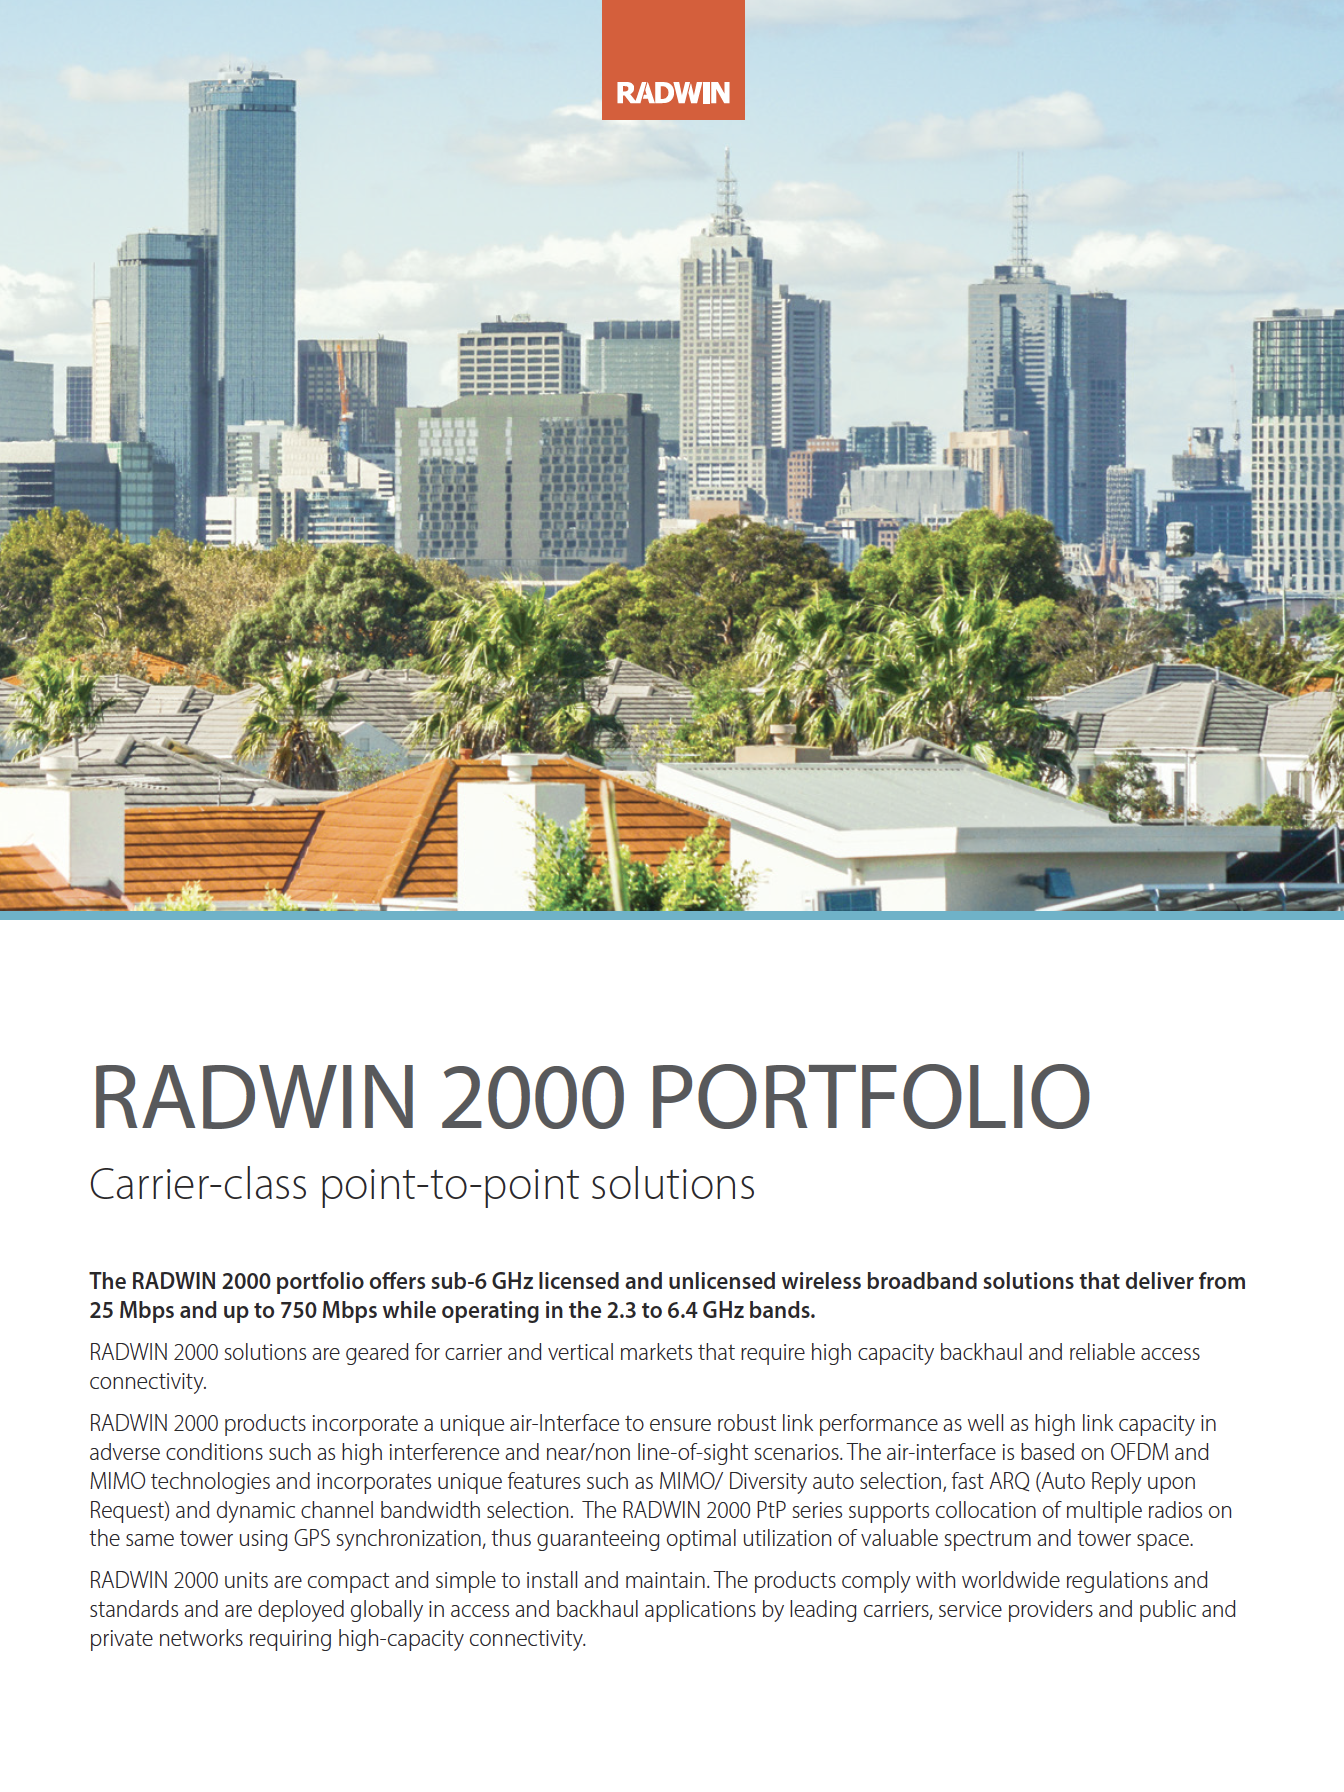 RADWIN POINT TO POINT SOLUTIONS COVER.png